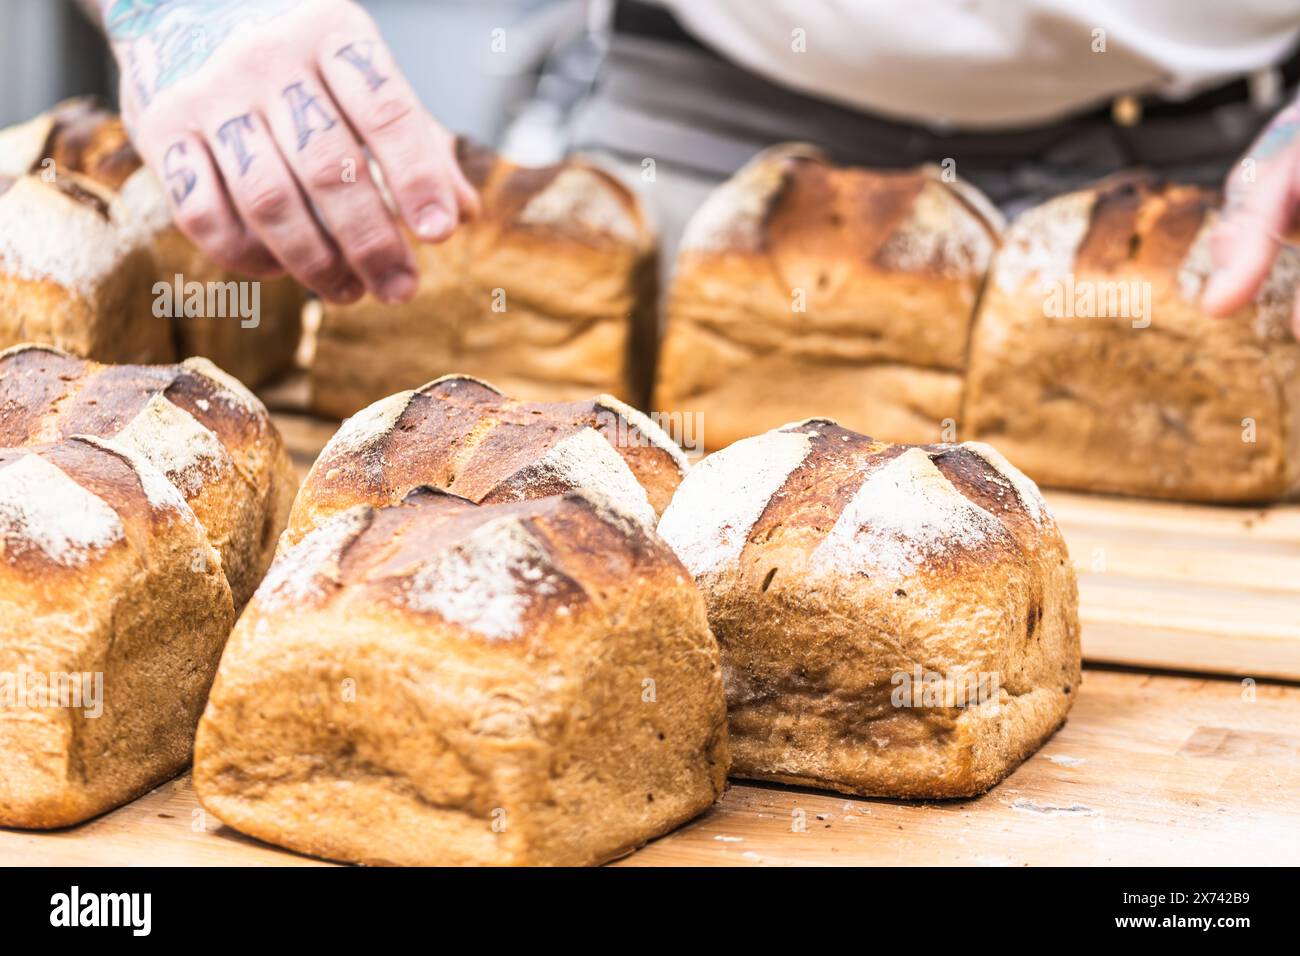 Professional baker holding wooden tray with freshly baked hot bread loaves. Stock Photo